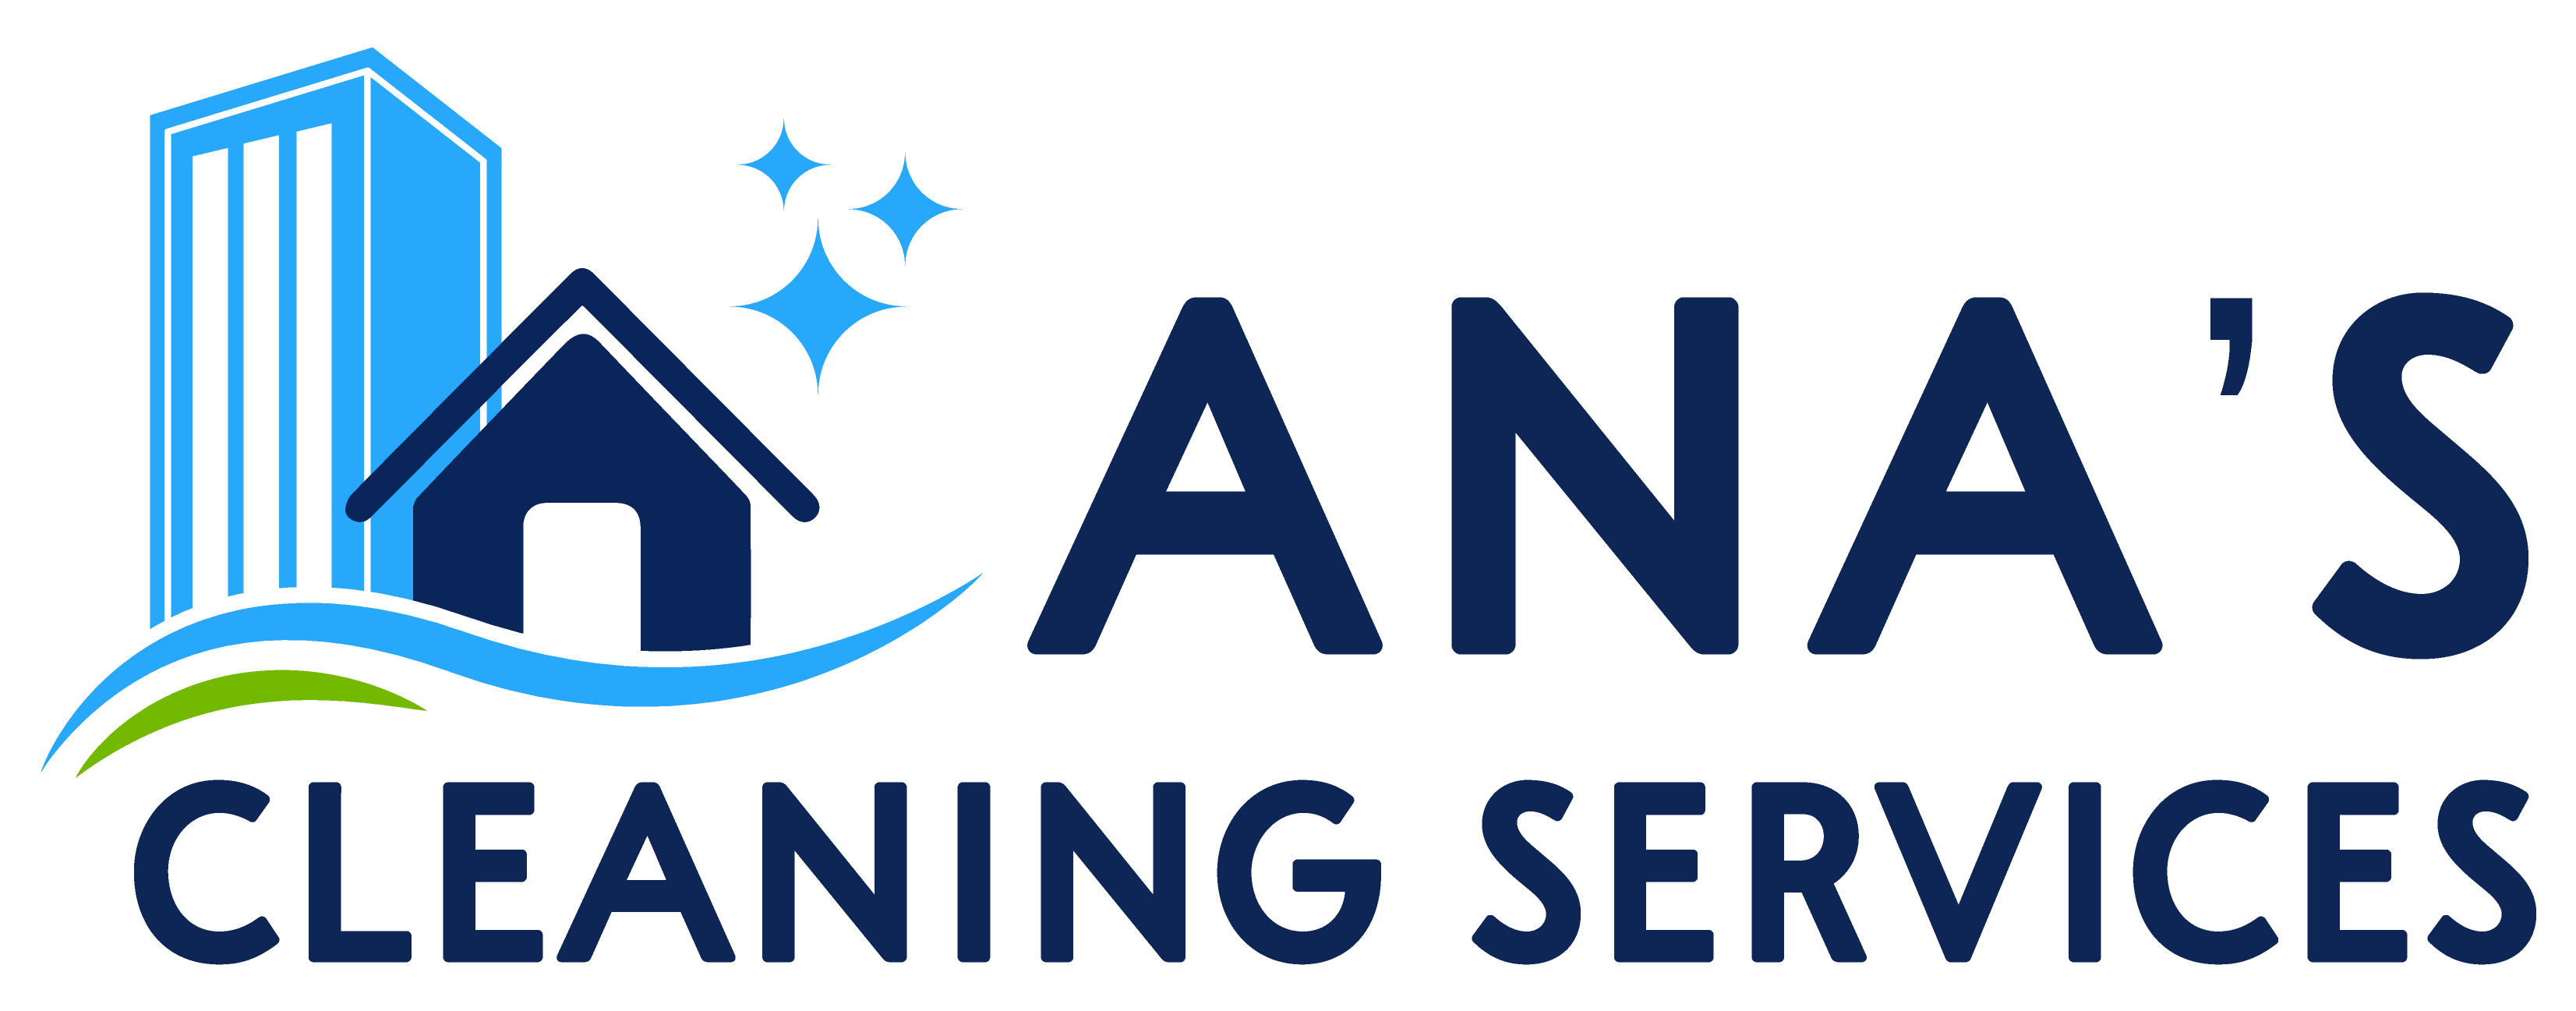 Ana’s Cleaning Services